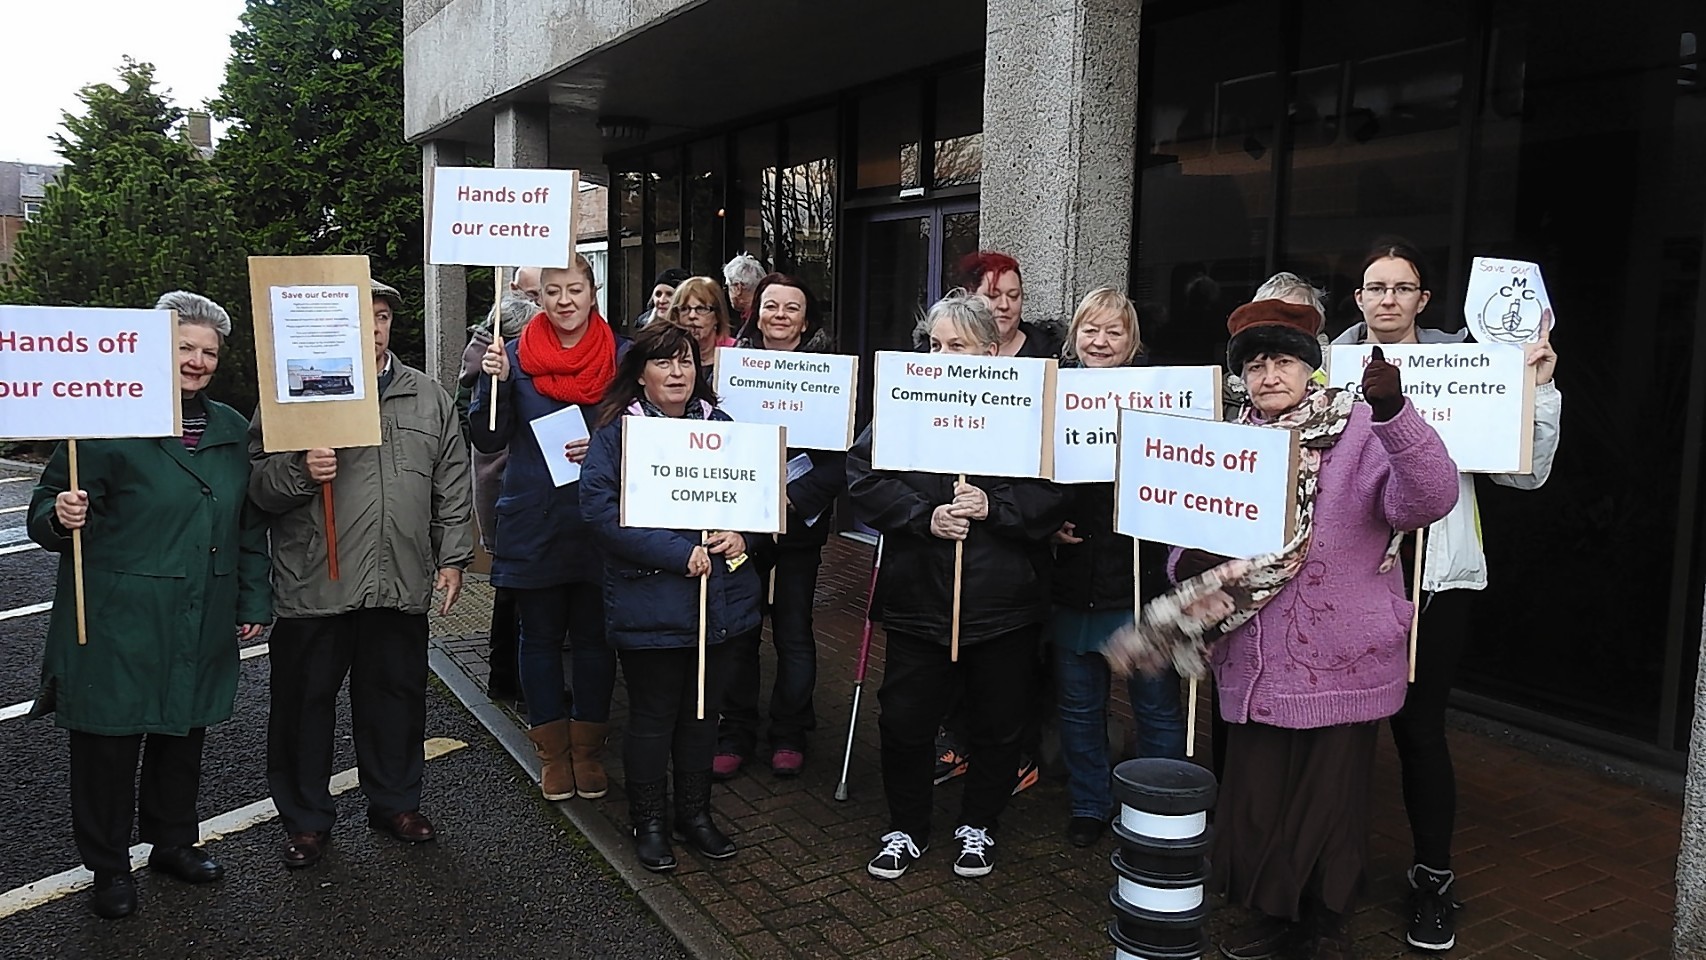 A protest was held by Merkinch residents outside Highland Council HQ to try and prevent the closure